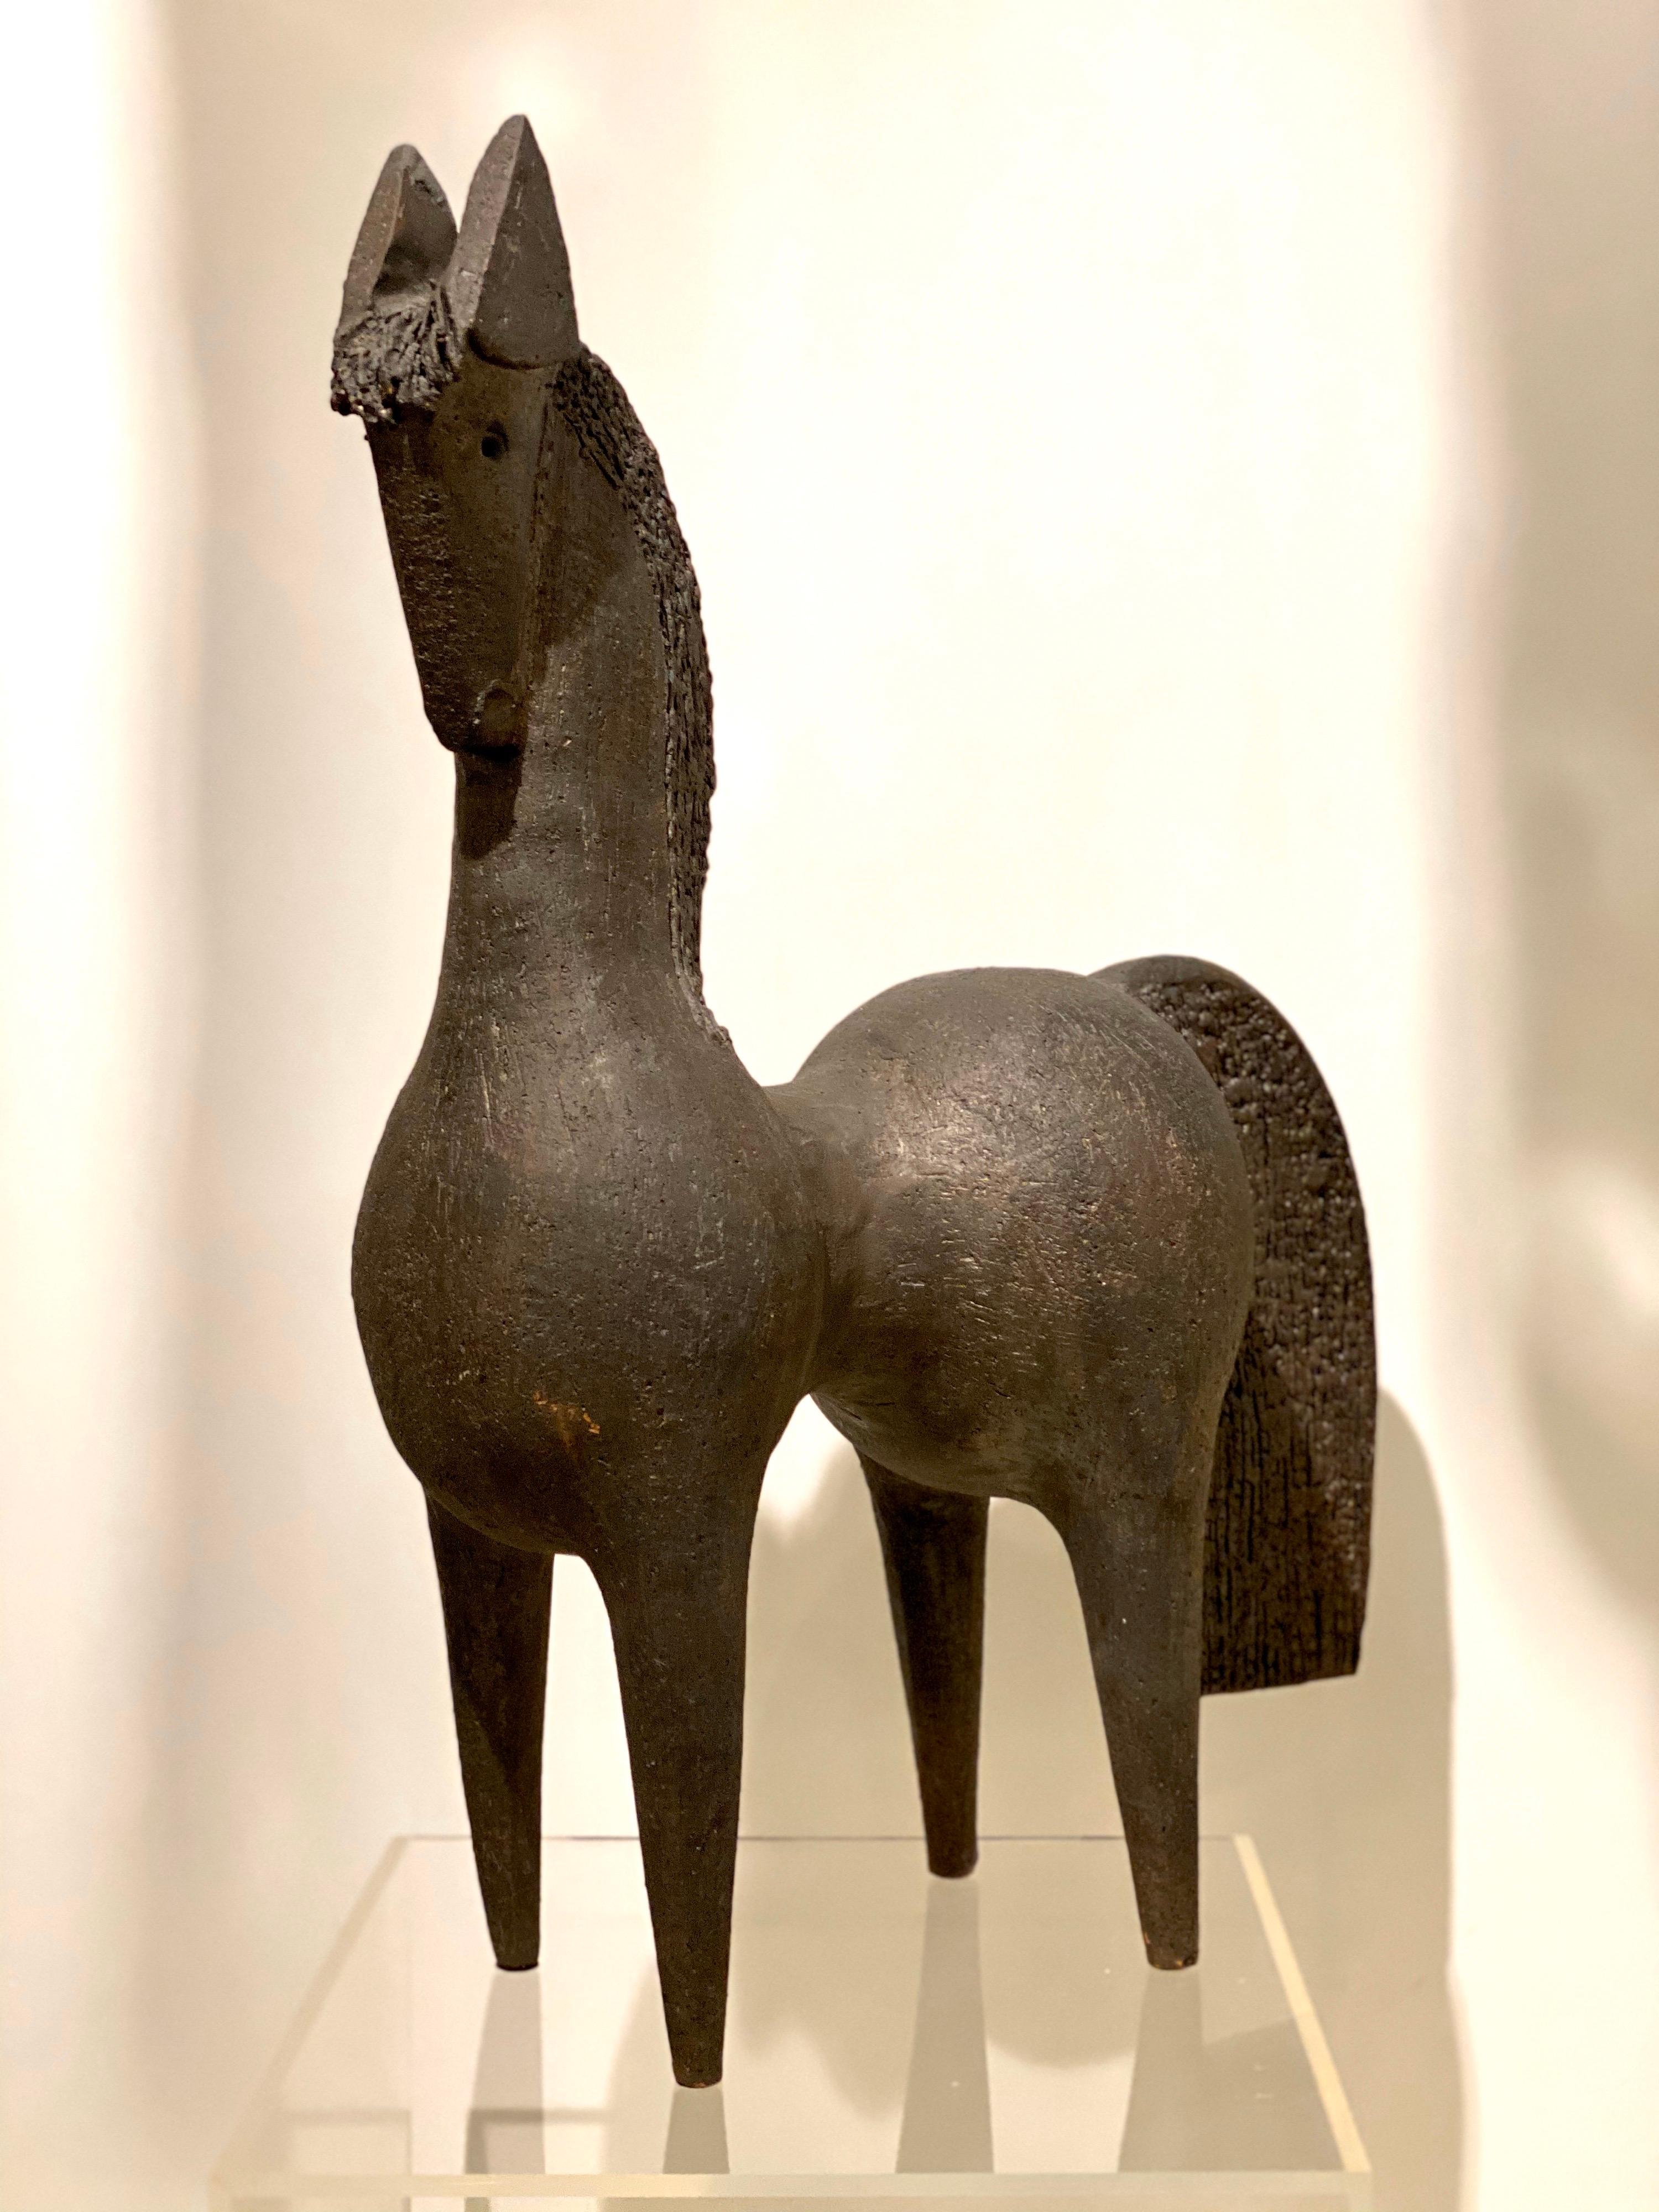 Born in 1956, D.Pouchain is a French potter using different ceramic techniques to create in a single shot his stylized animals.
Clearly influenced by primitive Art, his pieces are coated with manganese and copper, which gives a unique dark bronze